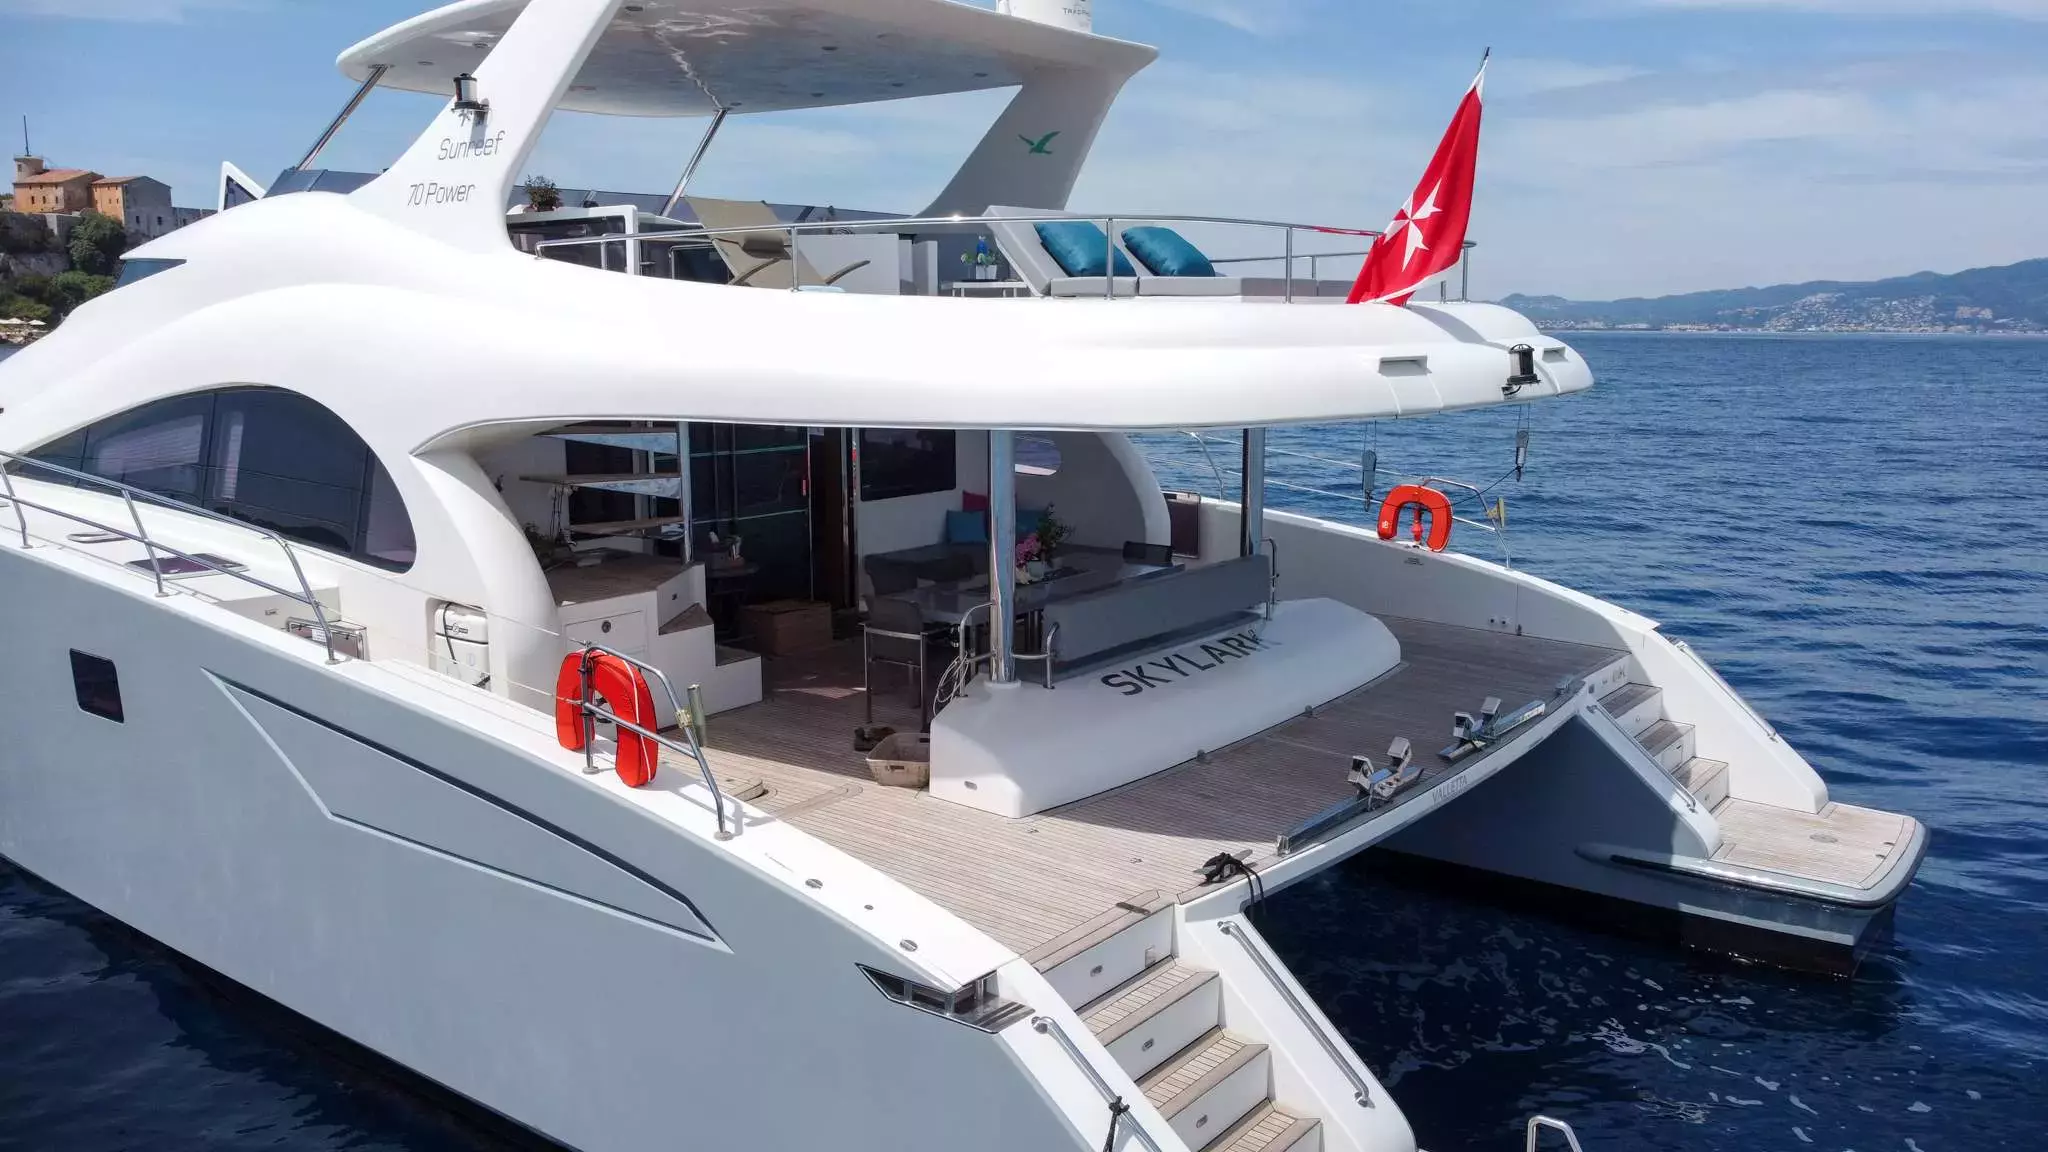 Skylark by Sunreef Yachts - Top rates for a Charter of a private Power Catamaran in Spain